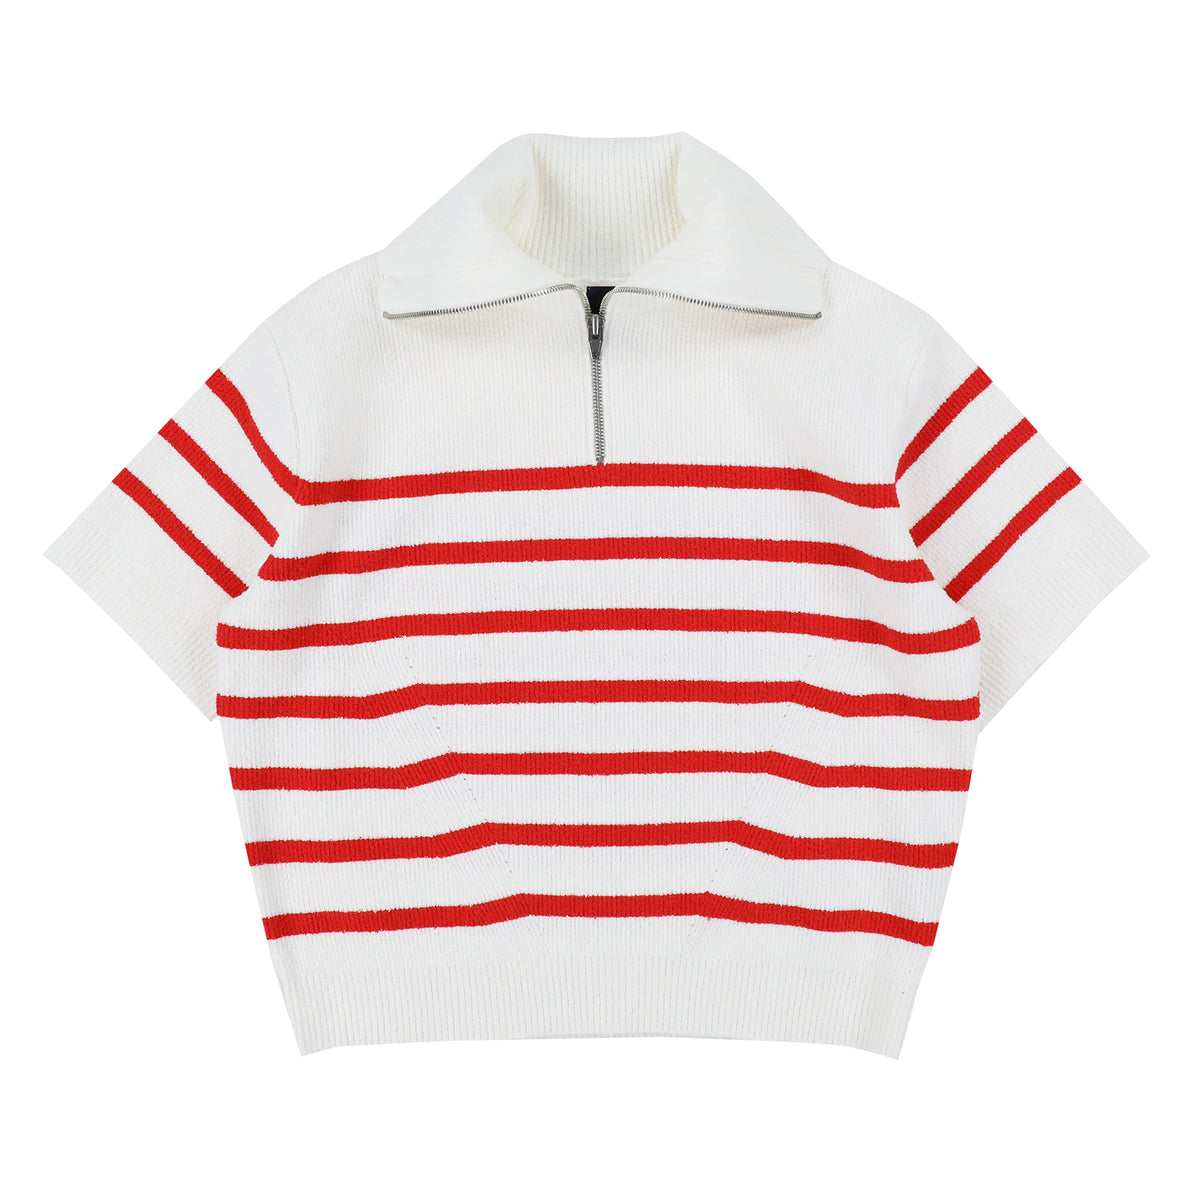 STRIPE WIDE COLLAR ZIP UP PULLOVER / RED